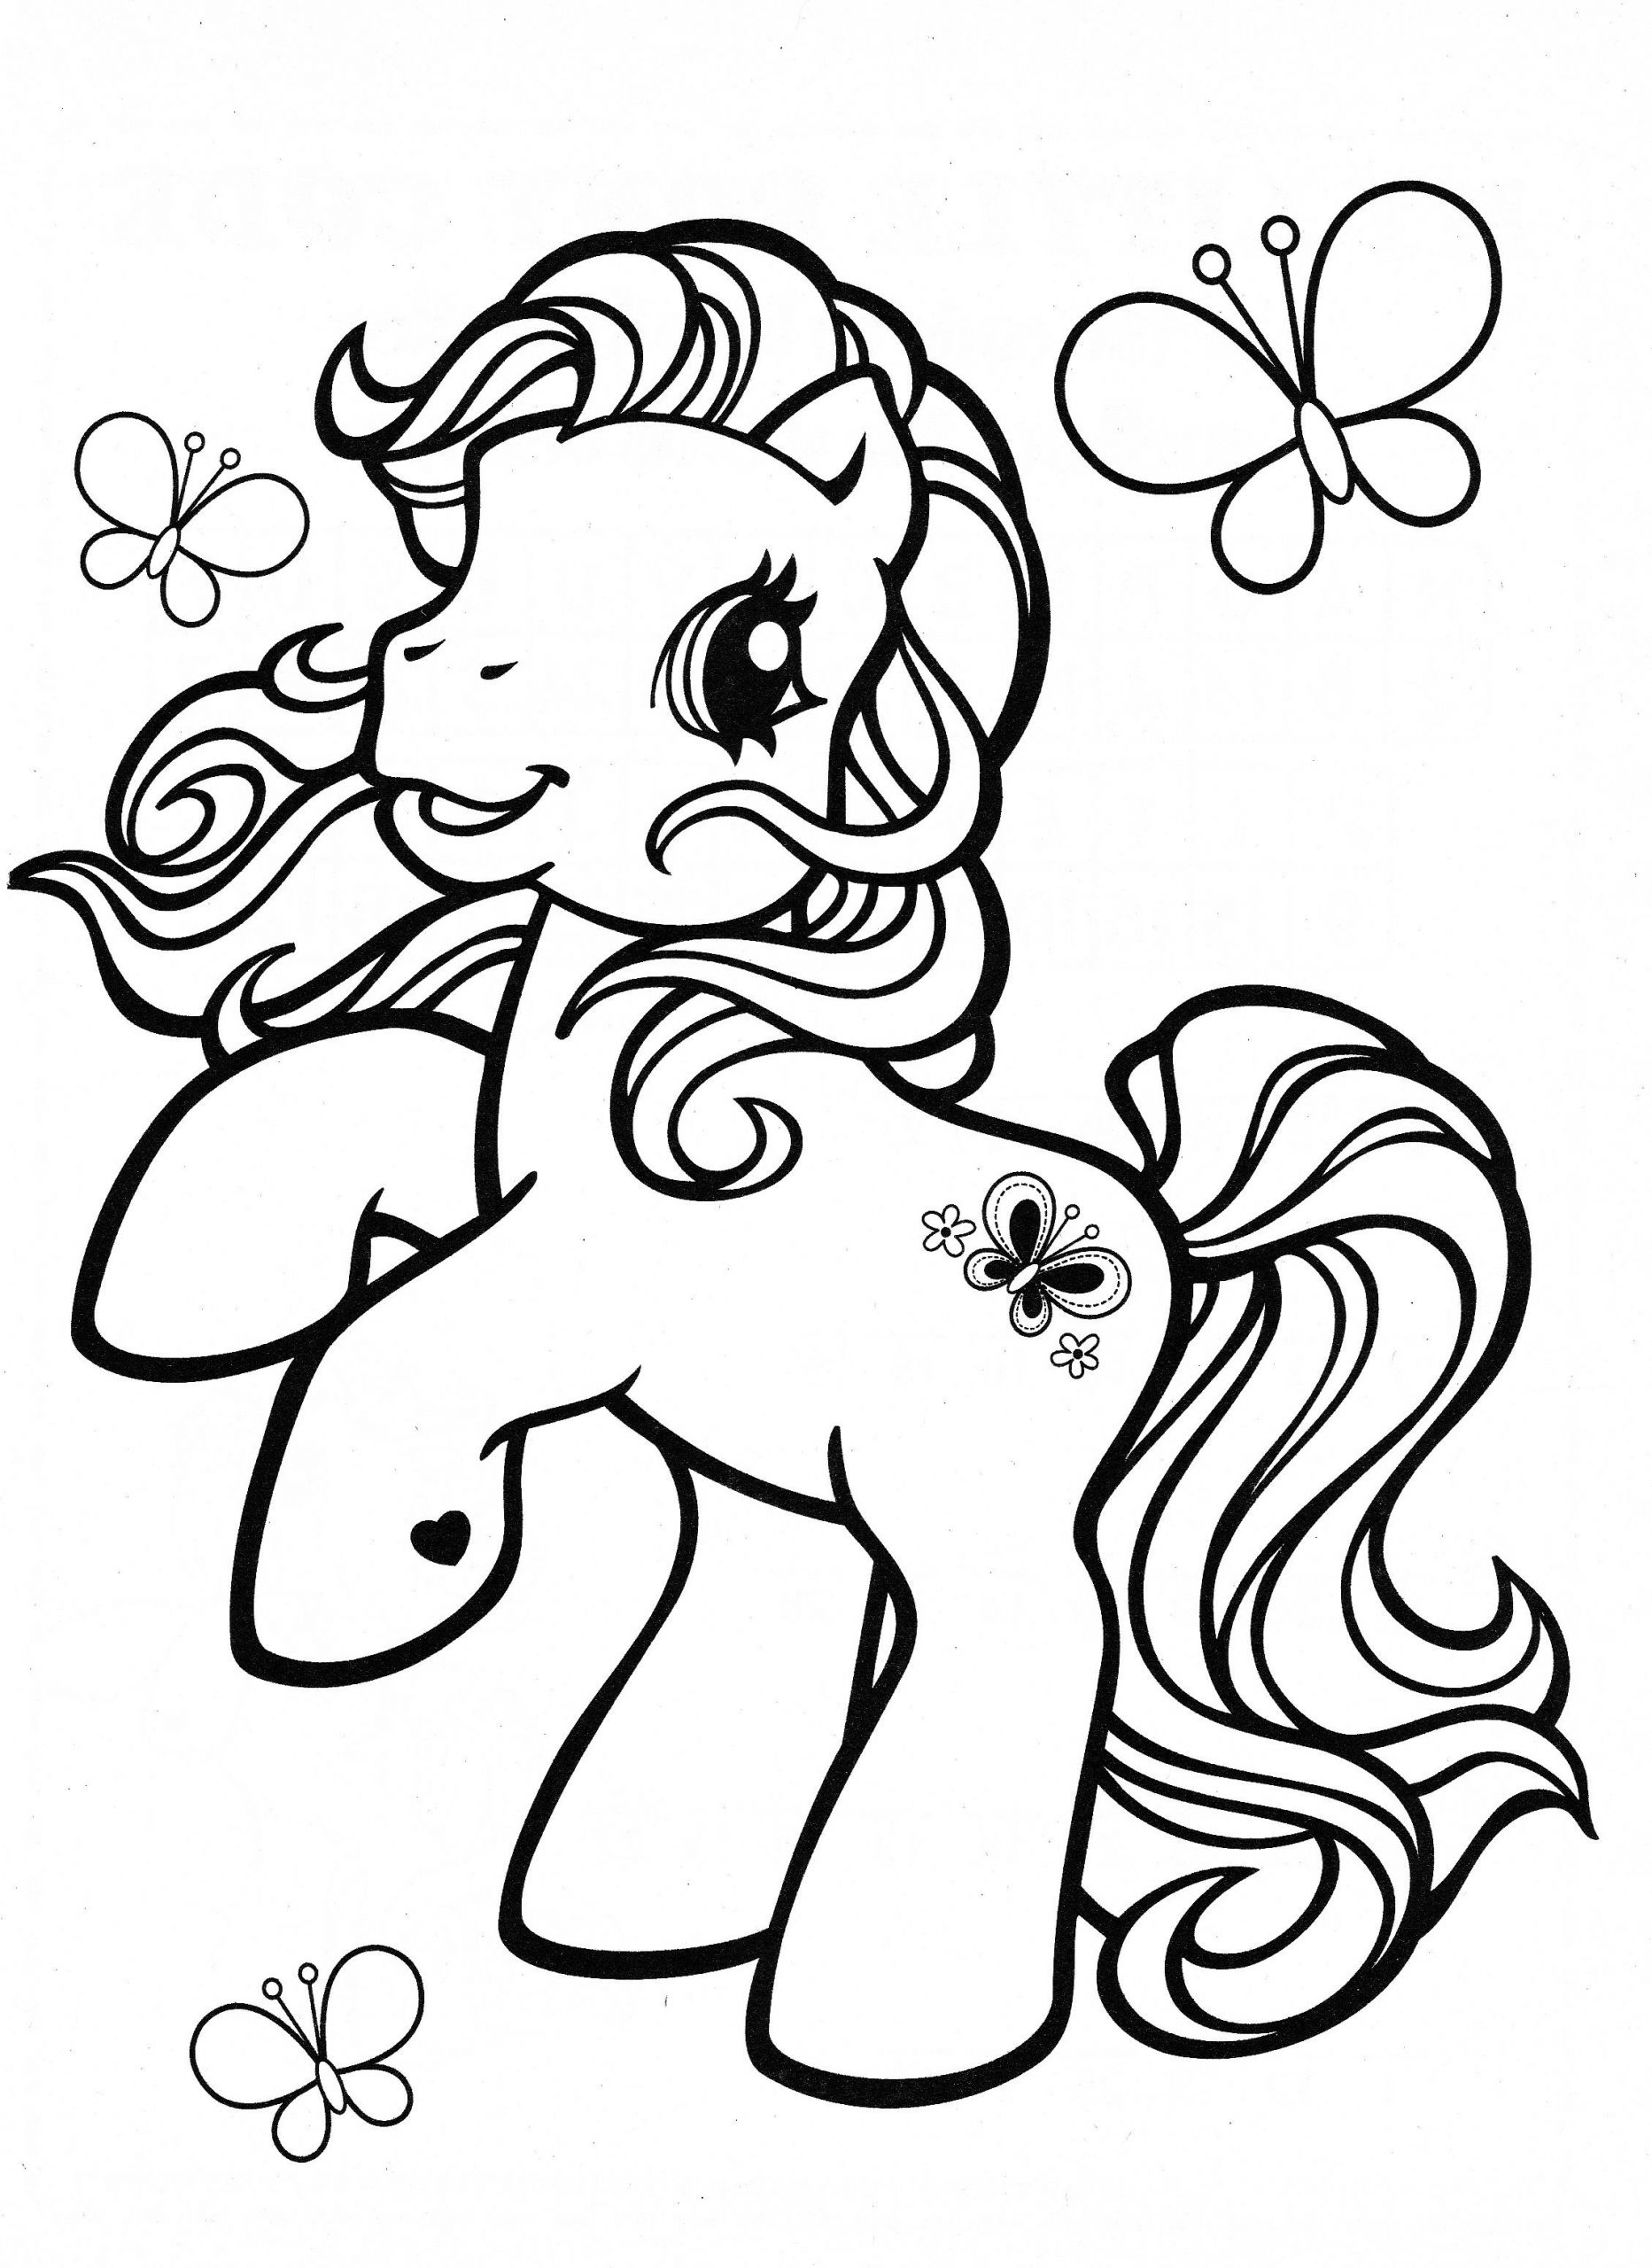 Coloring Sheets For Little Kids
 My Little Pony coloring page MLP Scootaloo Kids